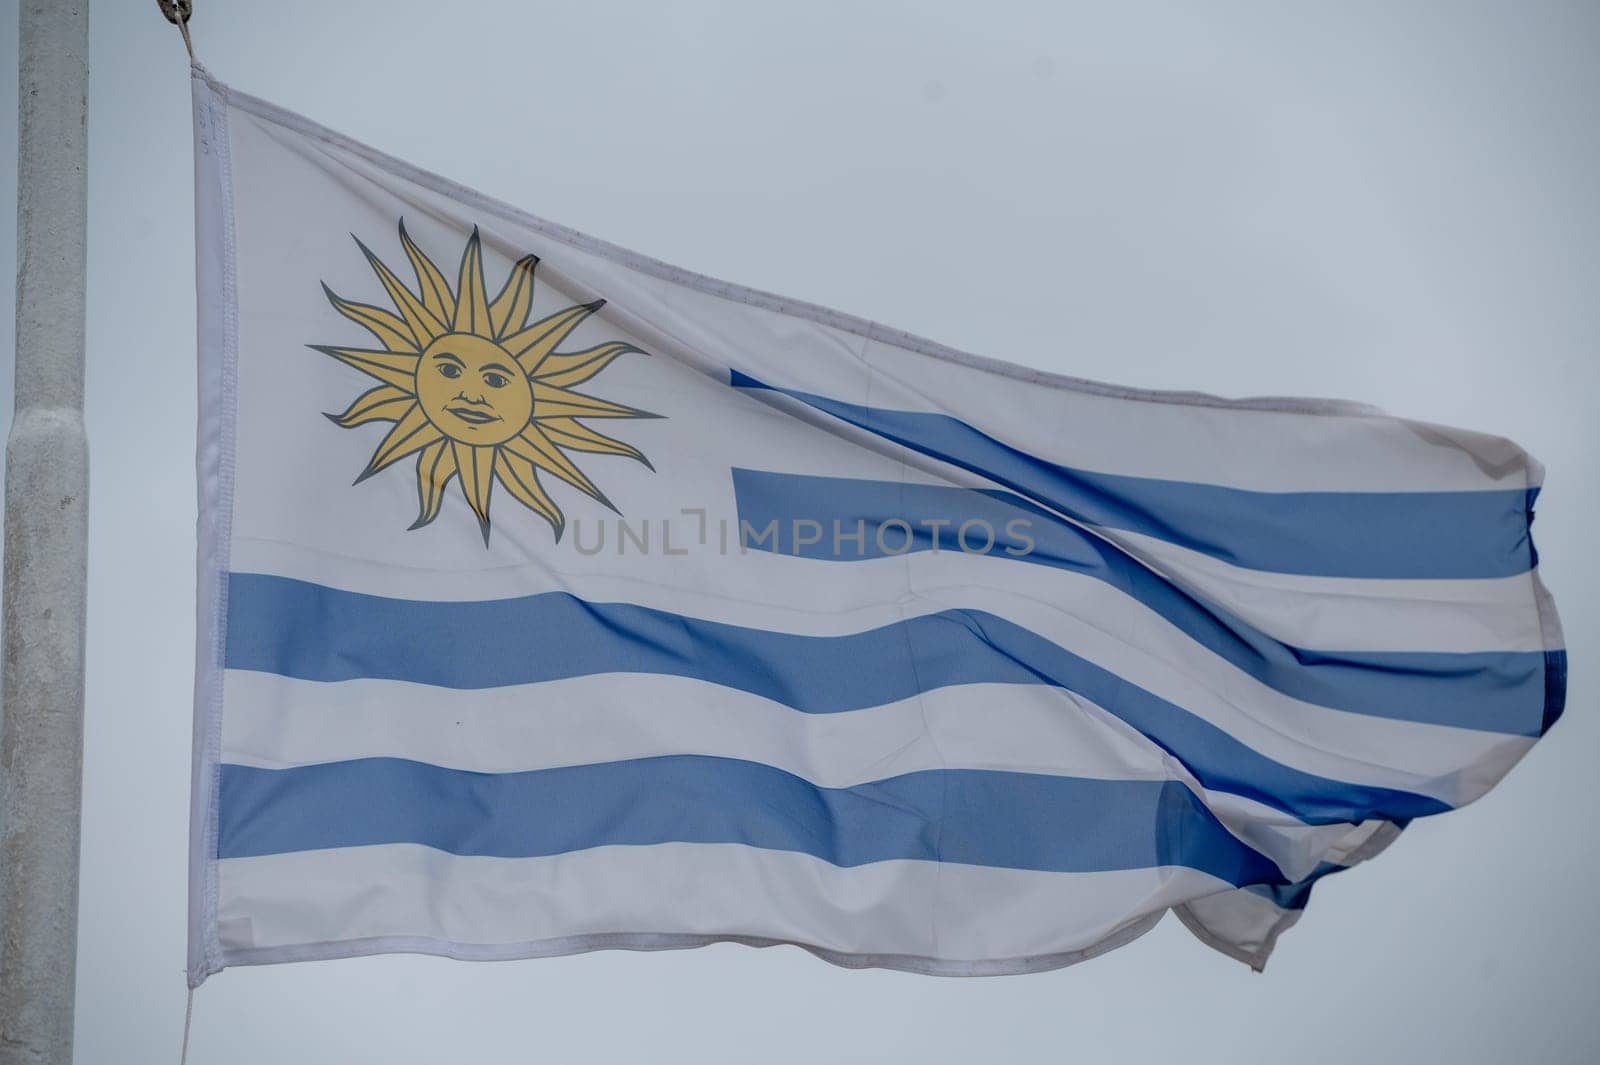 Uruguayan flag on the Colonia Express ship in the port of Buenos Aires on a rainy day by martinscphoto